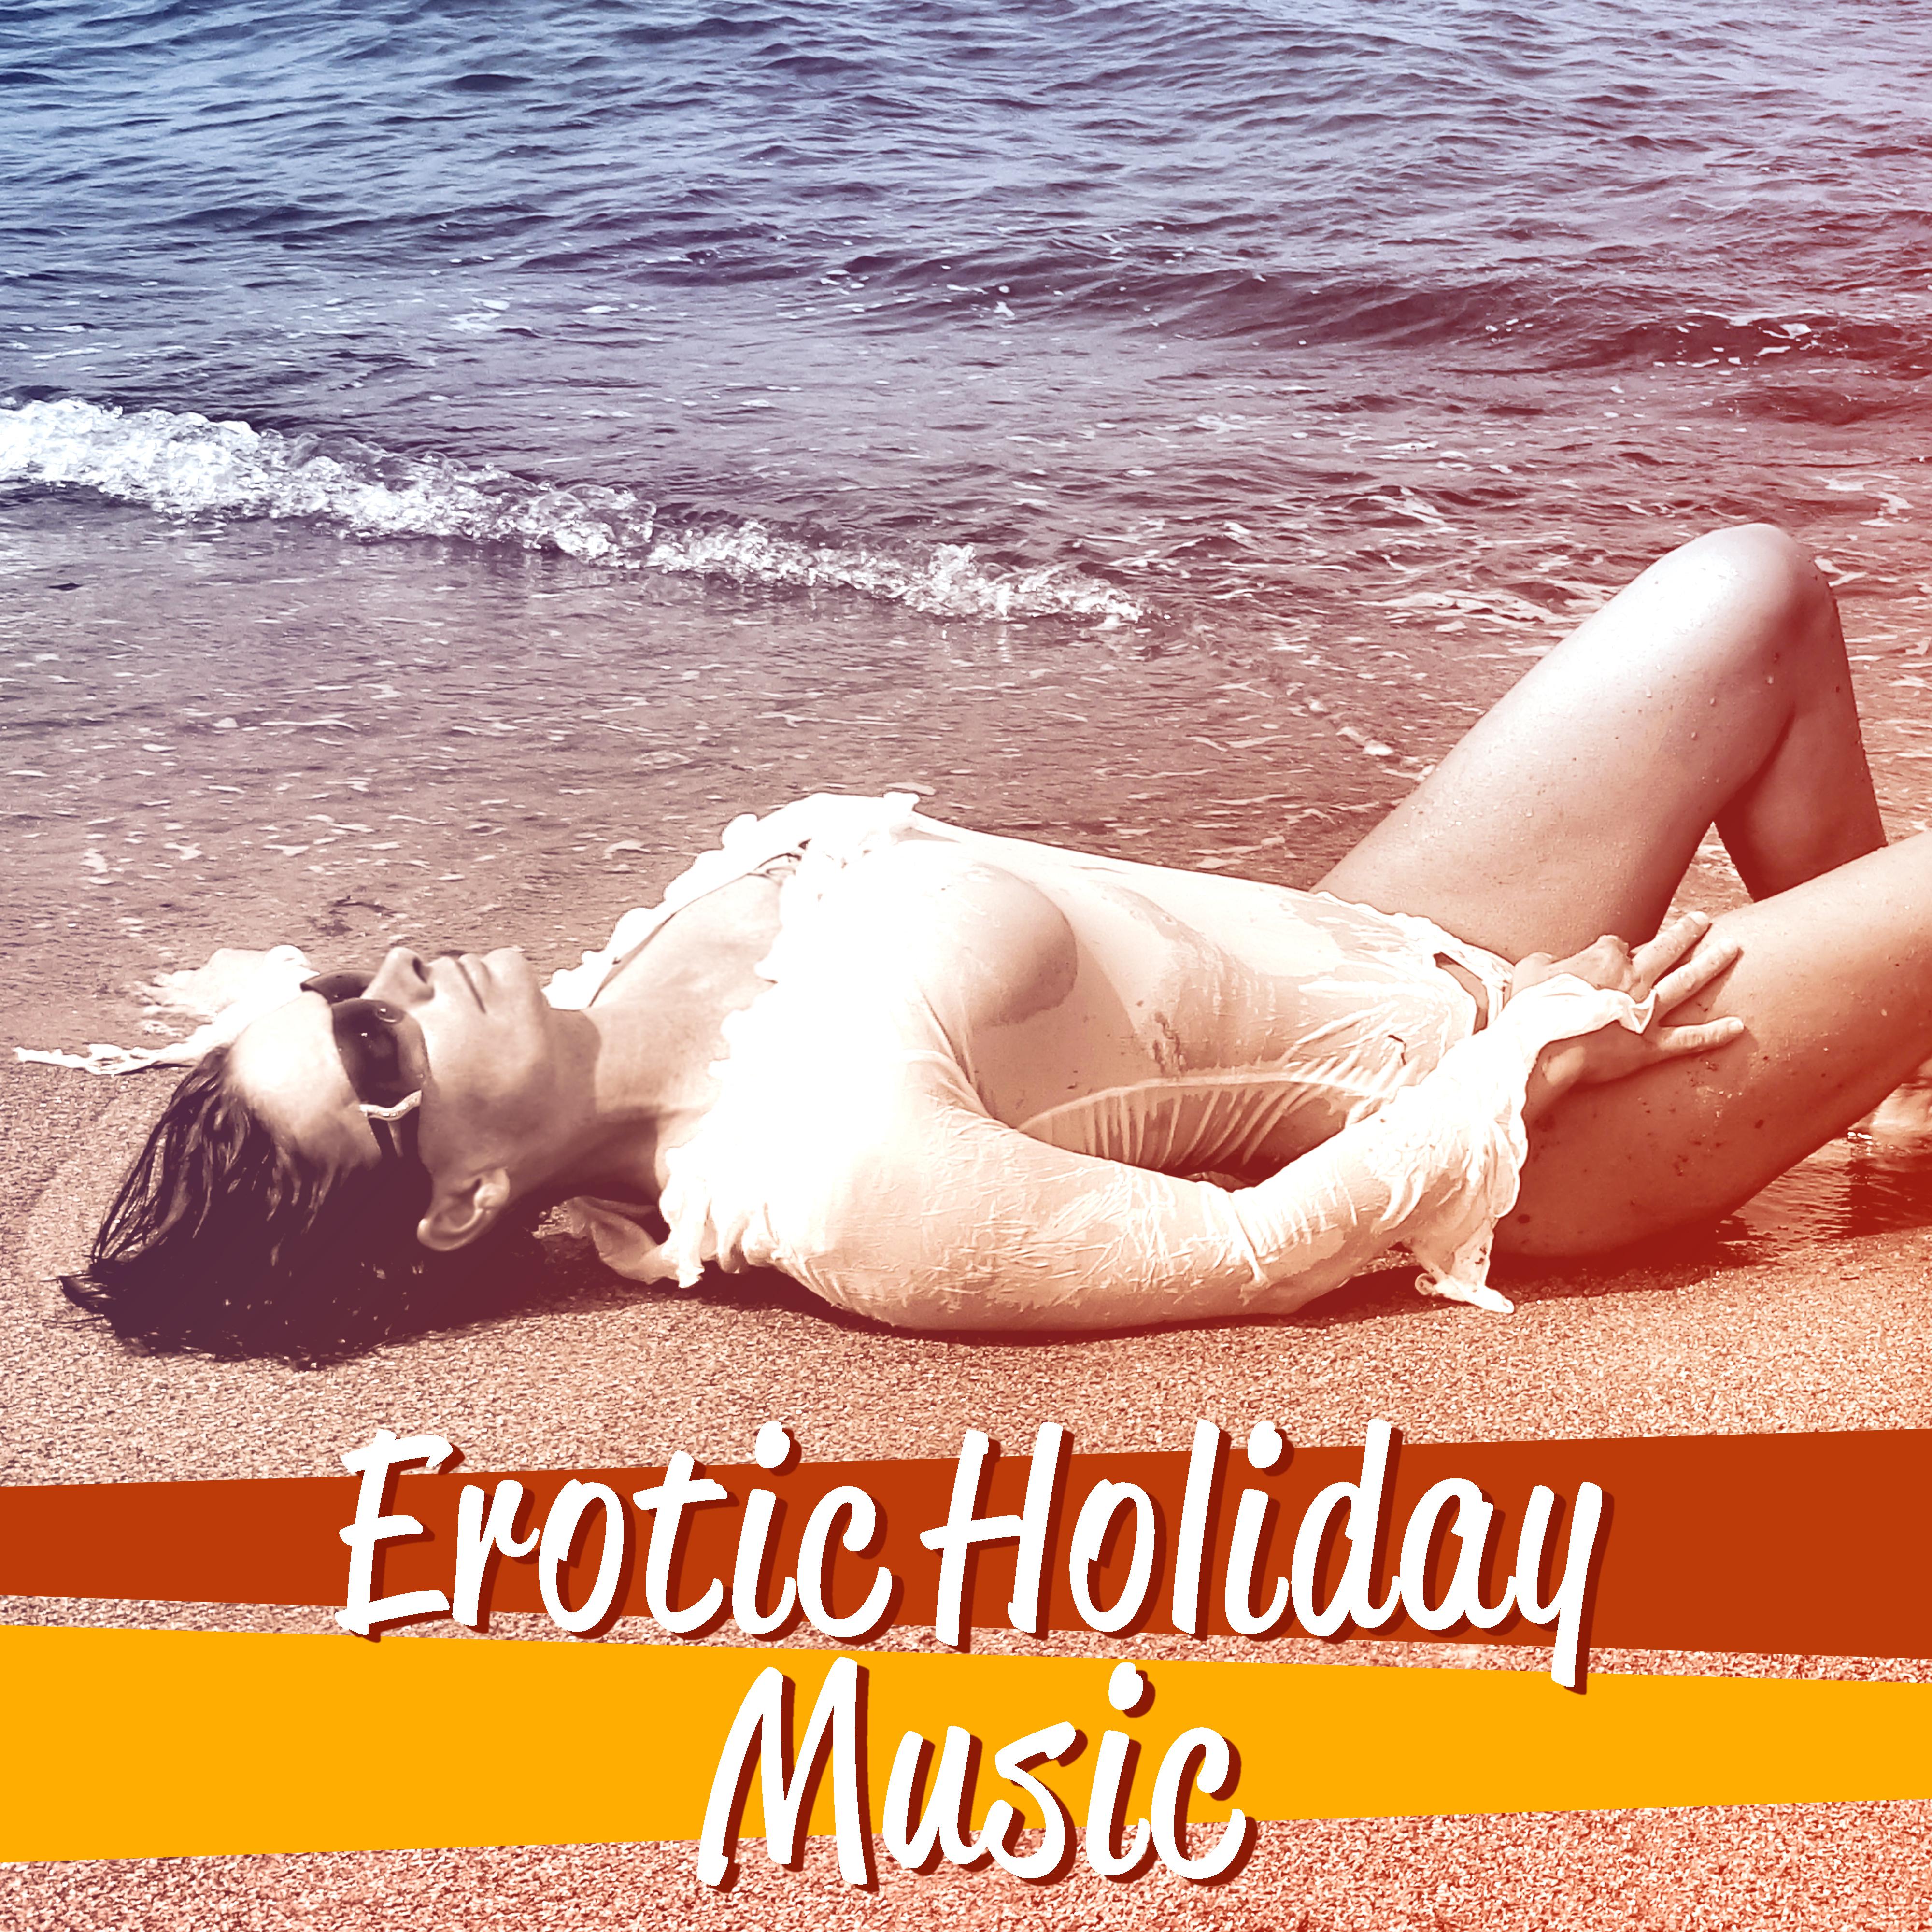 Erotic Holiday Music  Sensual Dance, Party Night, Summer Love, Erotic Lounge, Sensuality, Deep Relaxation, Summer Chill